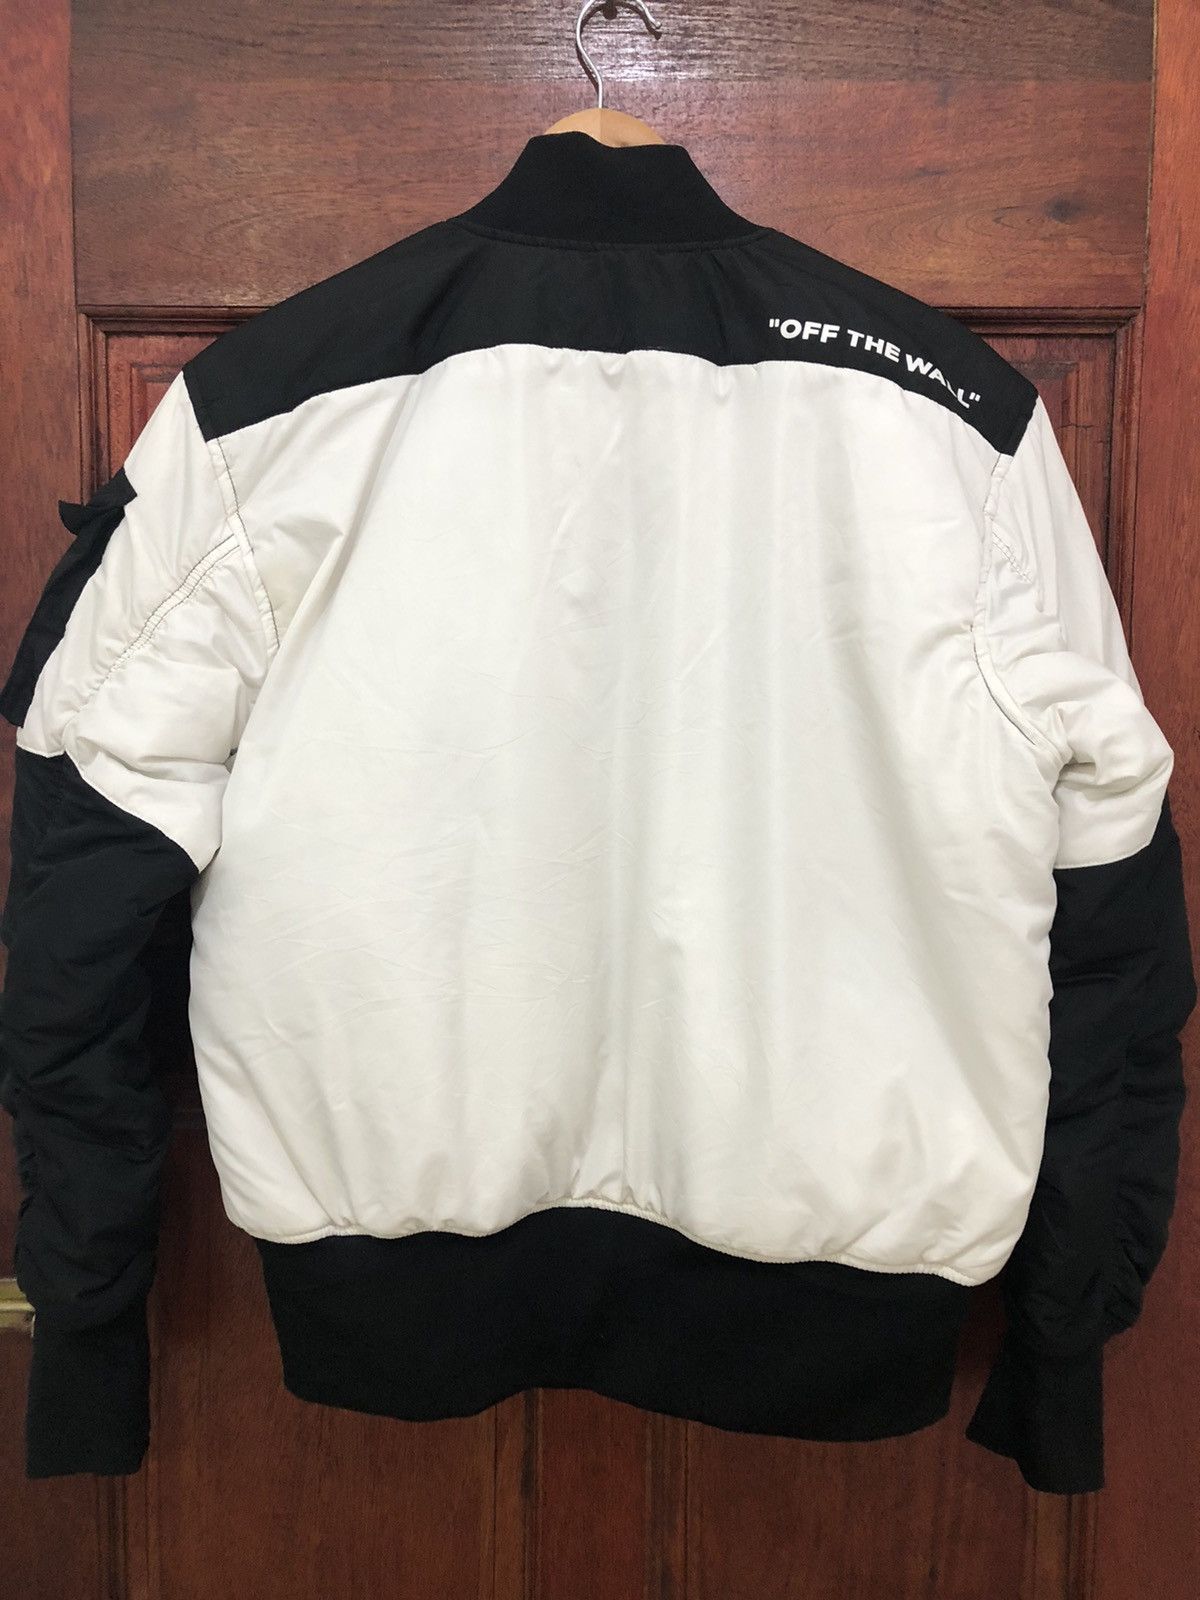 Vans ‘off the wall’ Reversible Bomber Jacket - 2